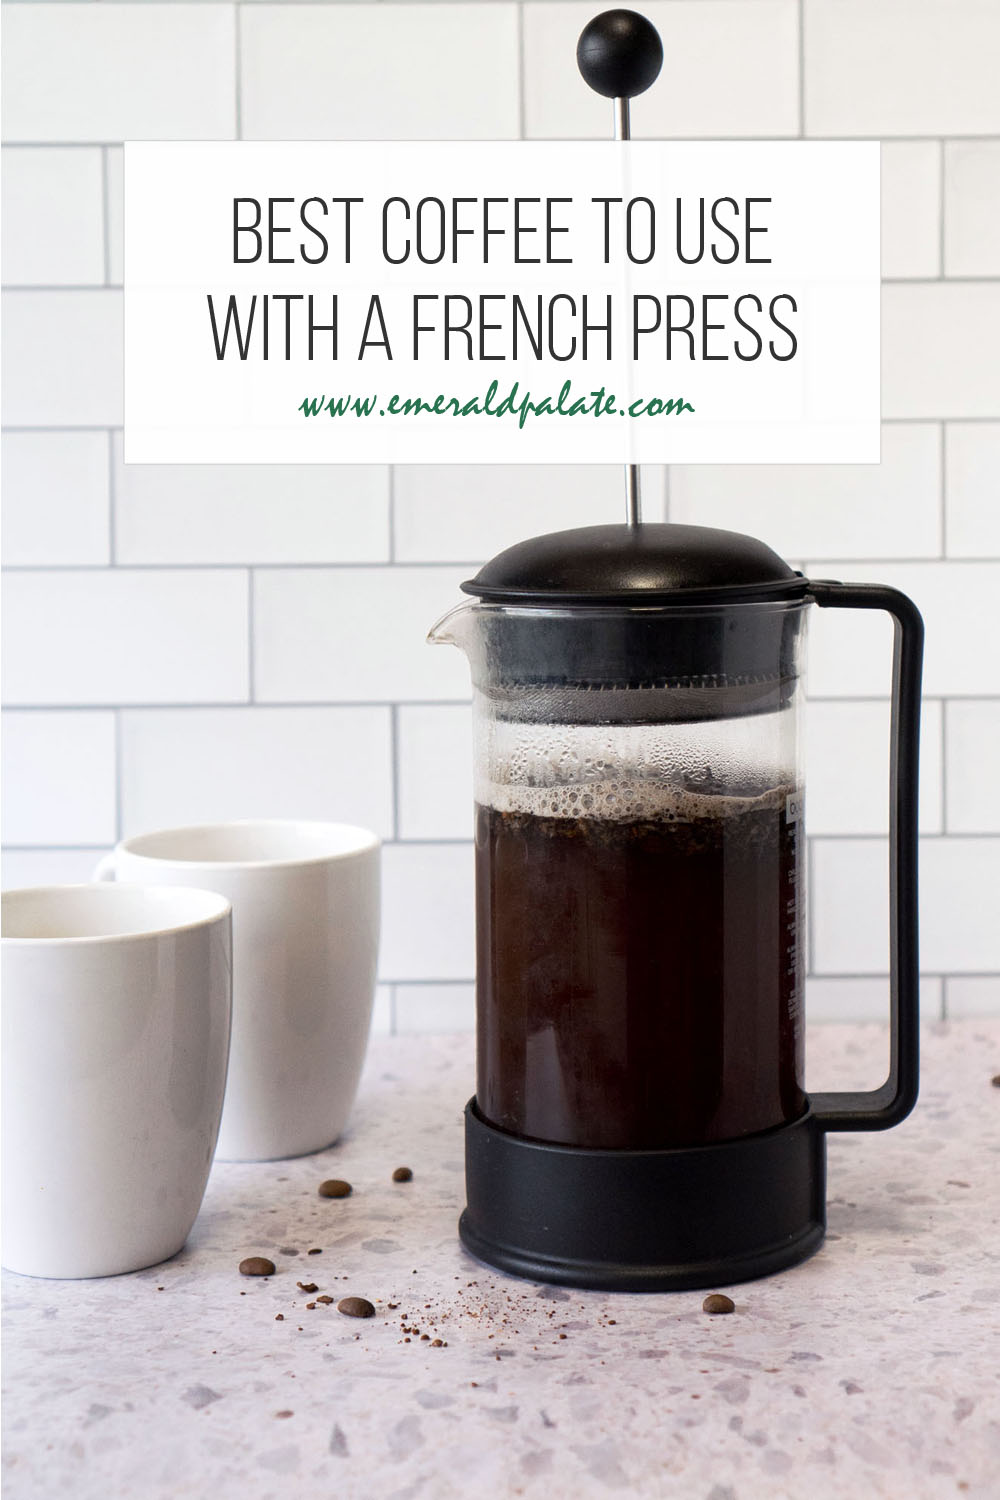 https://www.emeraldpalate.com/wp-content/uploads/2021/04/Best-Coffee-for-a-French-Press_PINTEREST.jpg